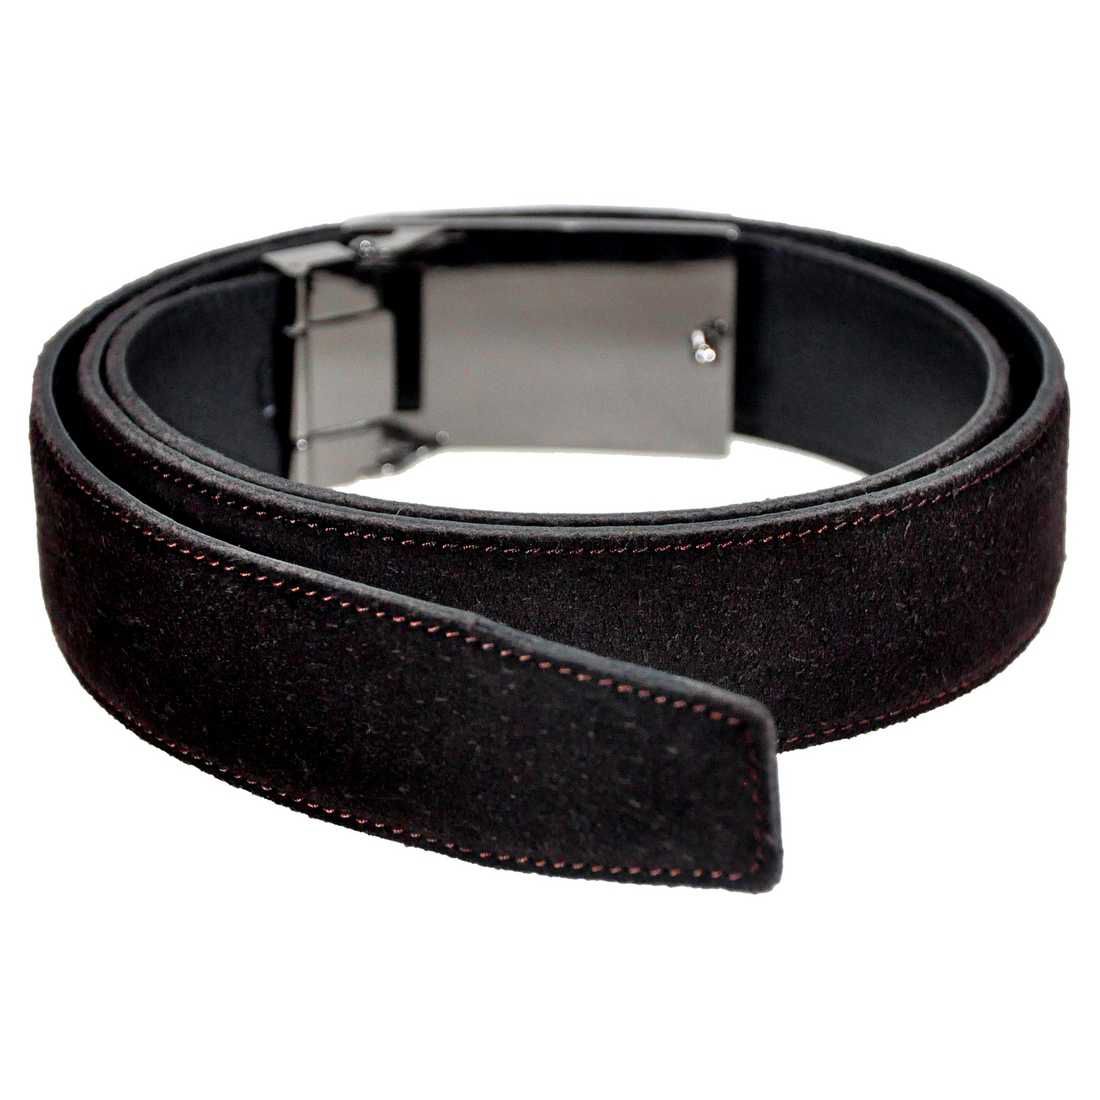 OHM New York Plaque buckle Suede Leather Belt Brown